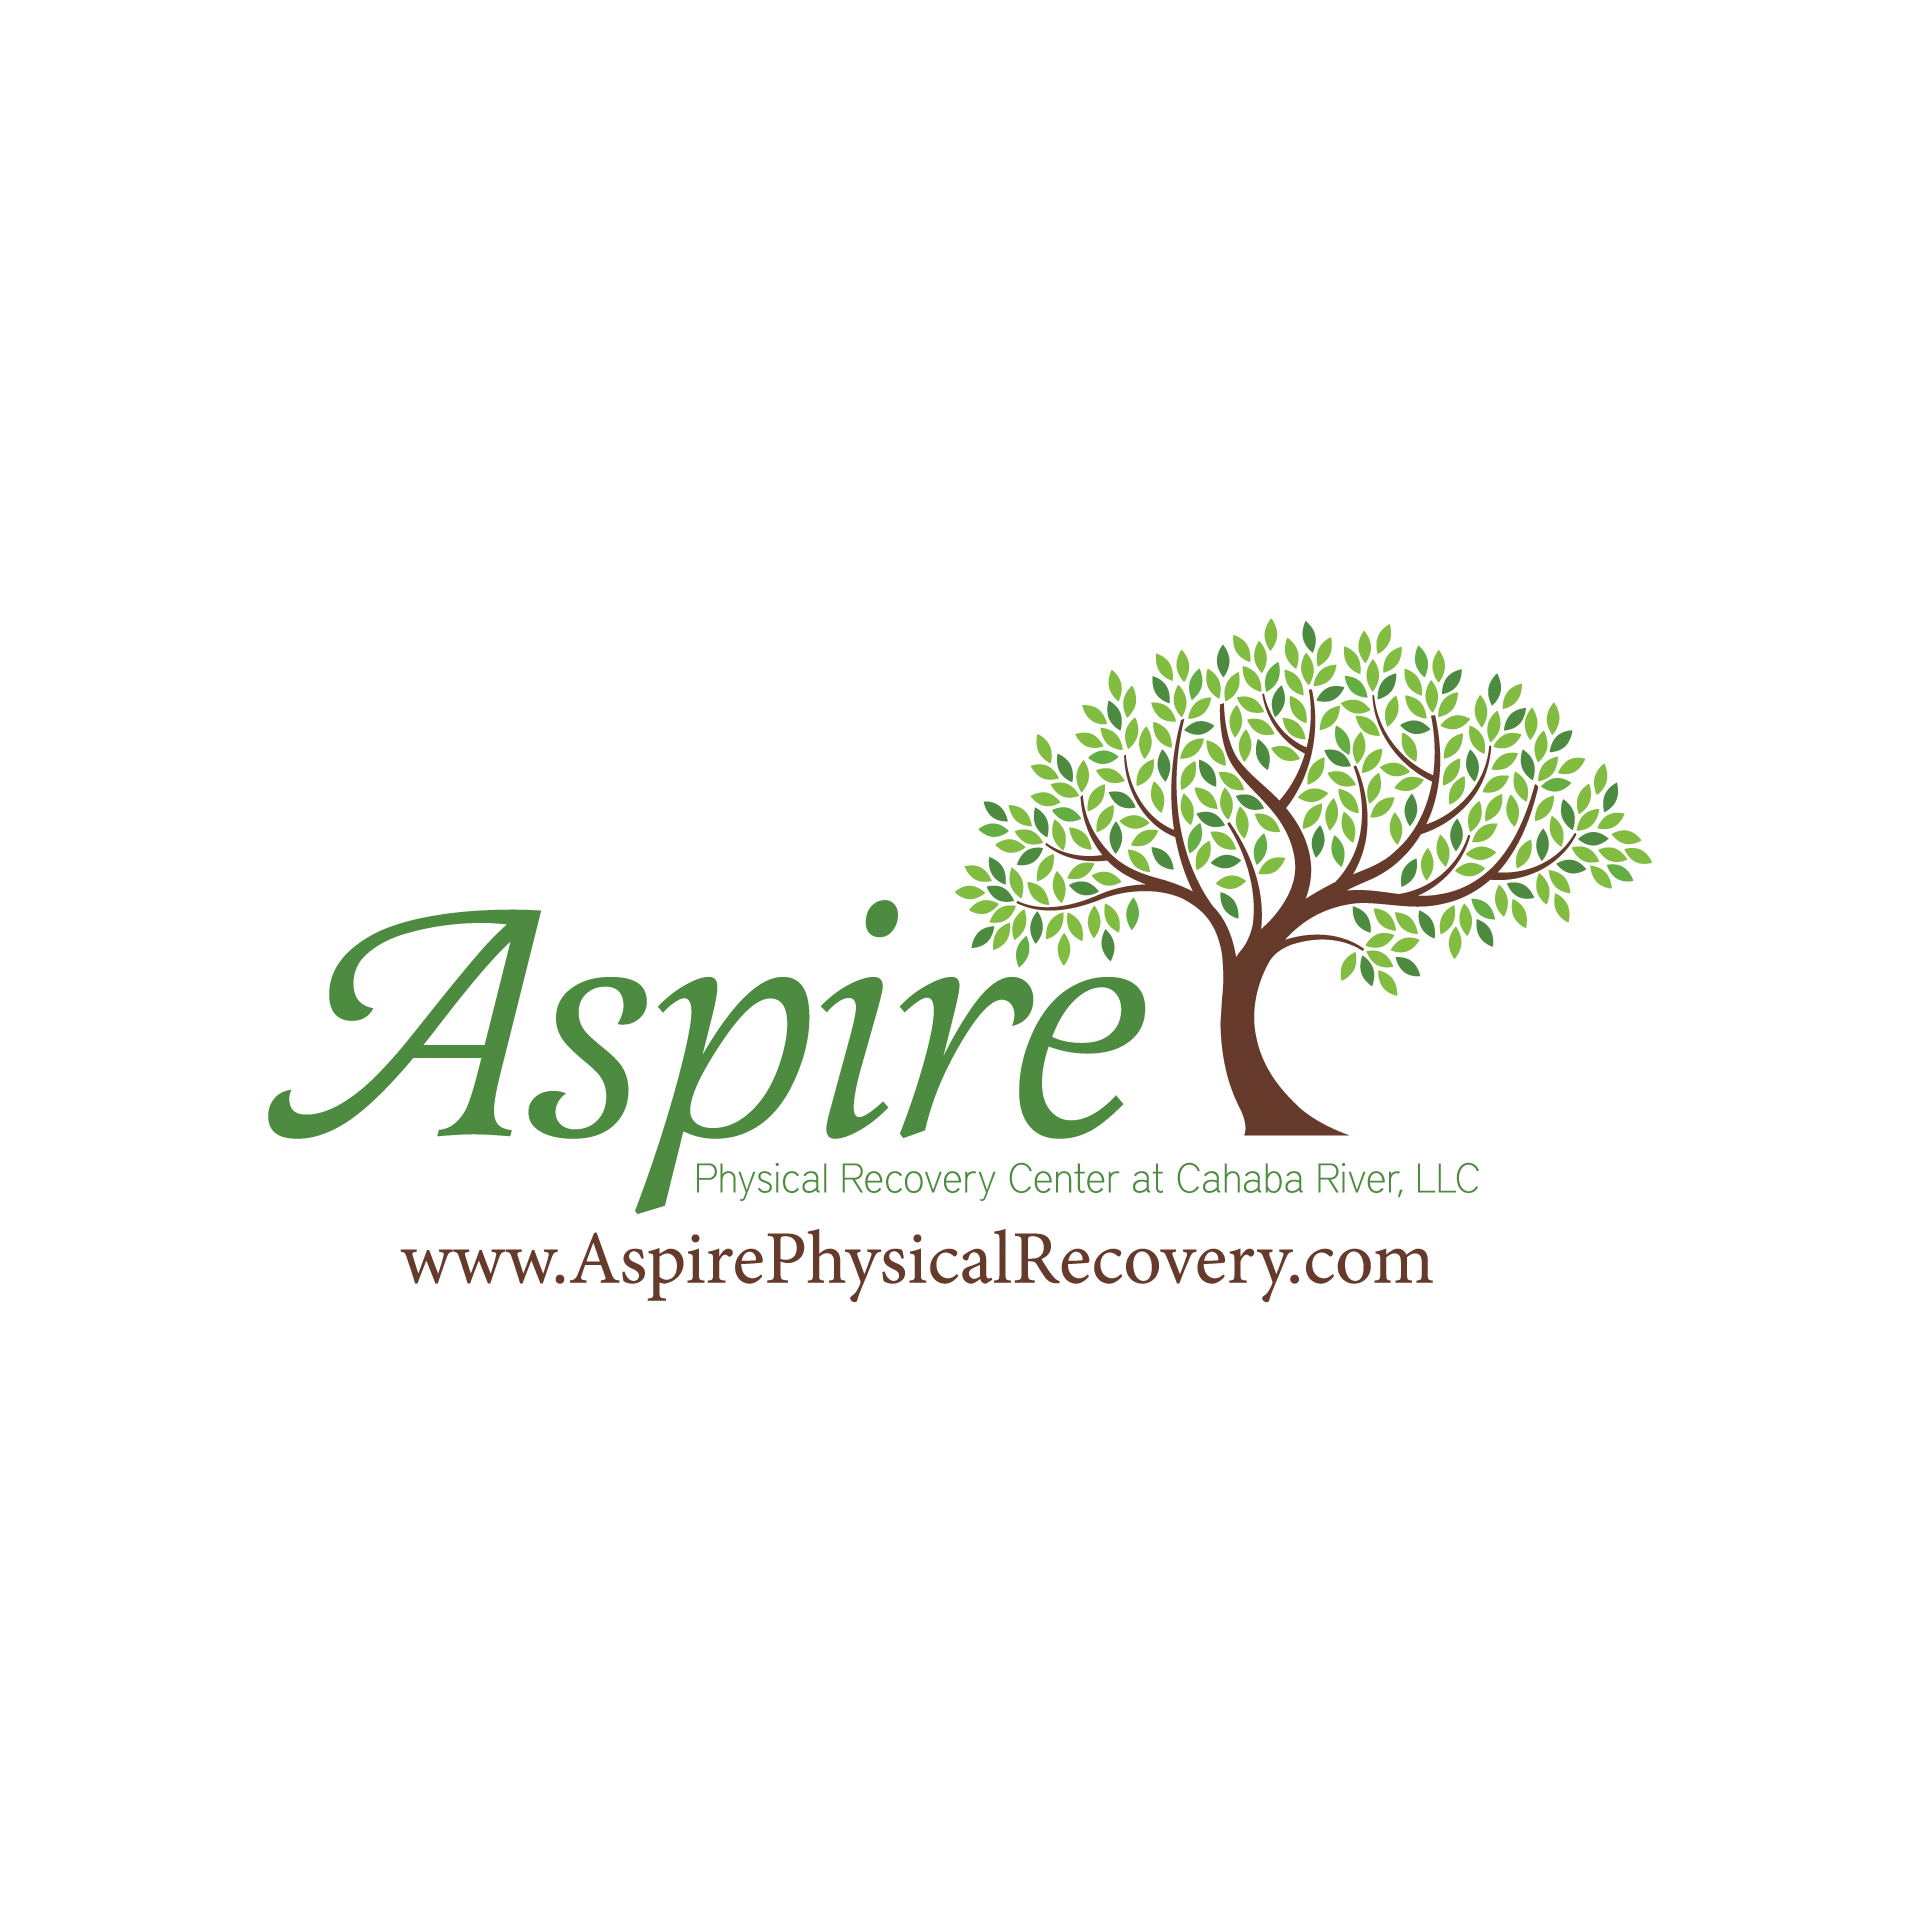 Aspire Physical Recovery Center at Cahaba River, LLC